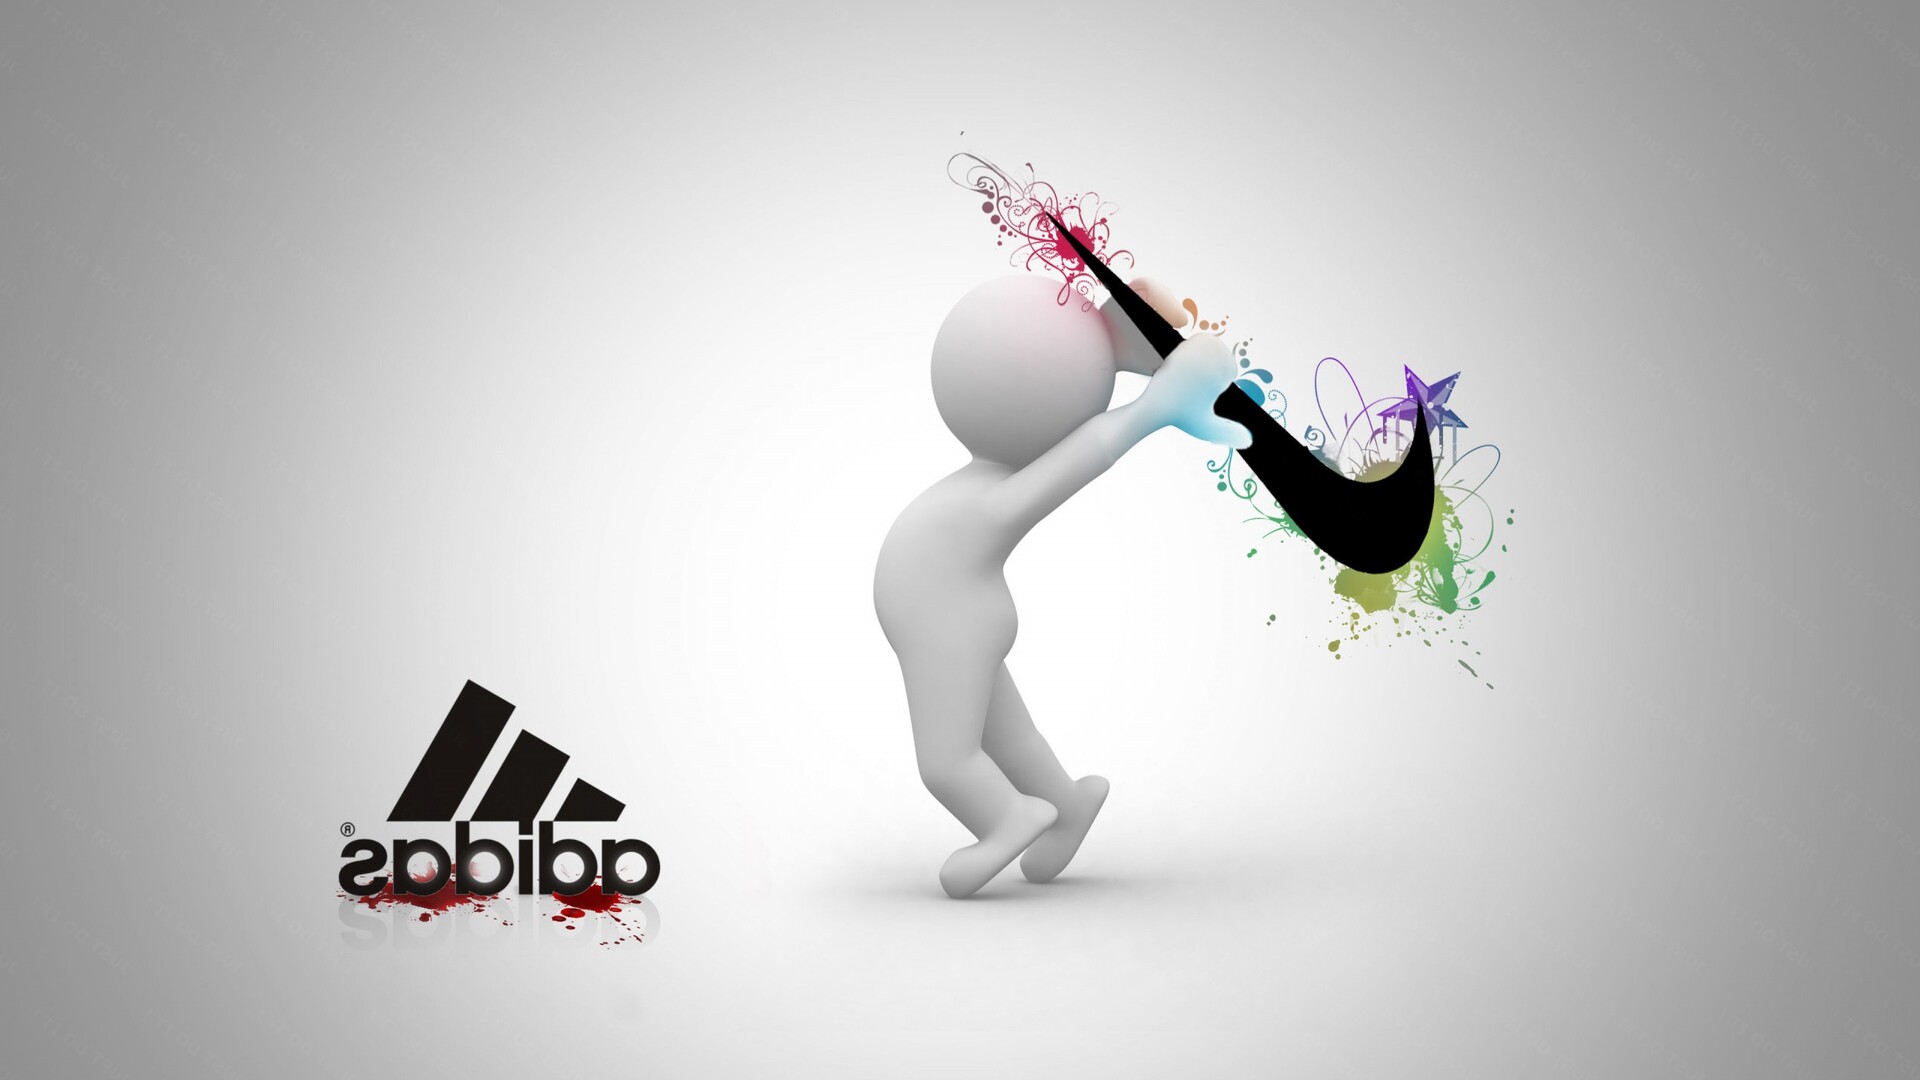 Pathetic move on Amphibious 1920x1080 Nike vs Adidas Laptop Full HD 1080P HD 4k Wallpapers, Images,  Backgrounds, Photos and Pictures